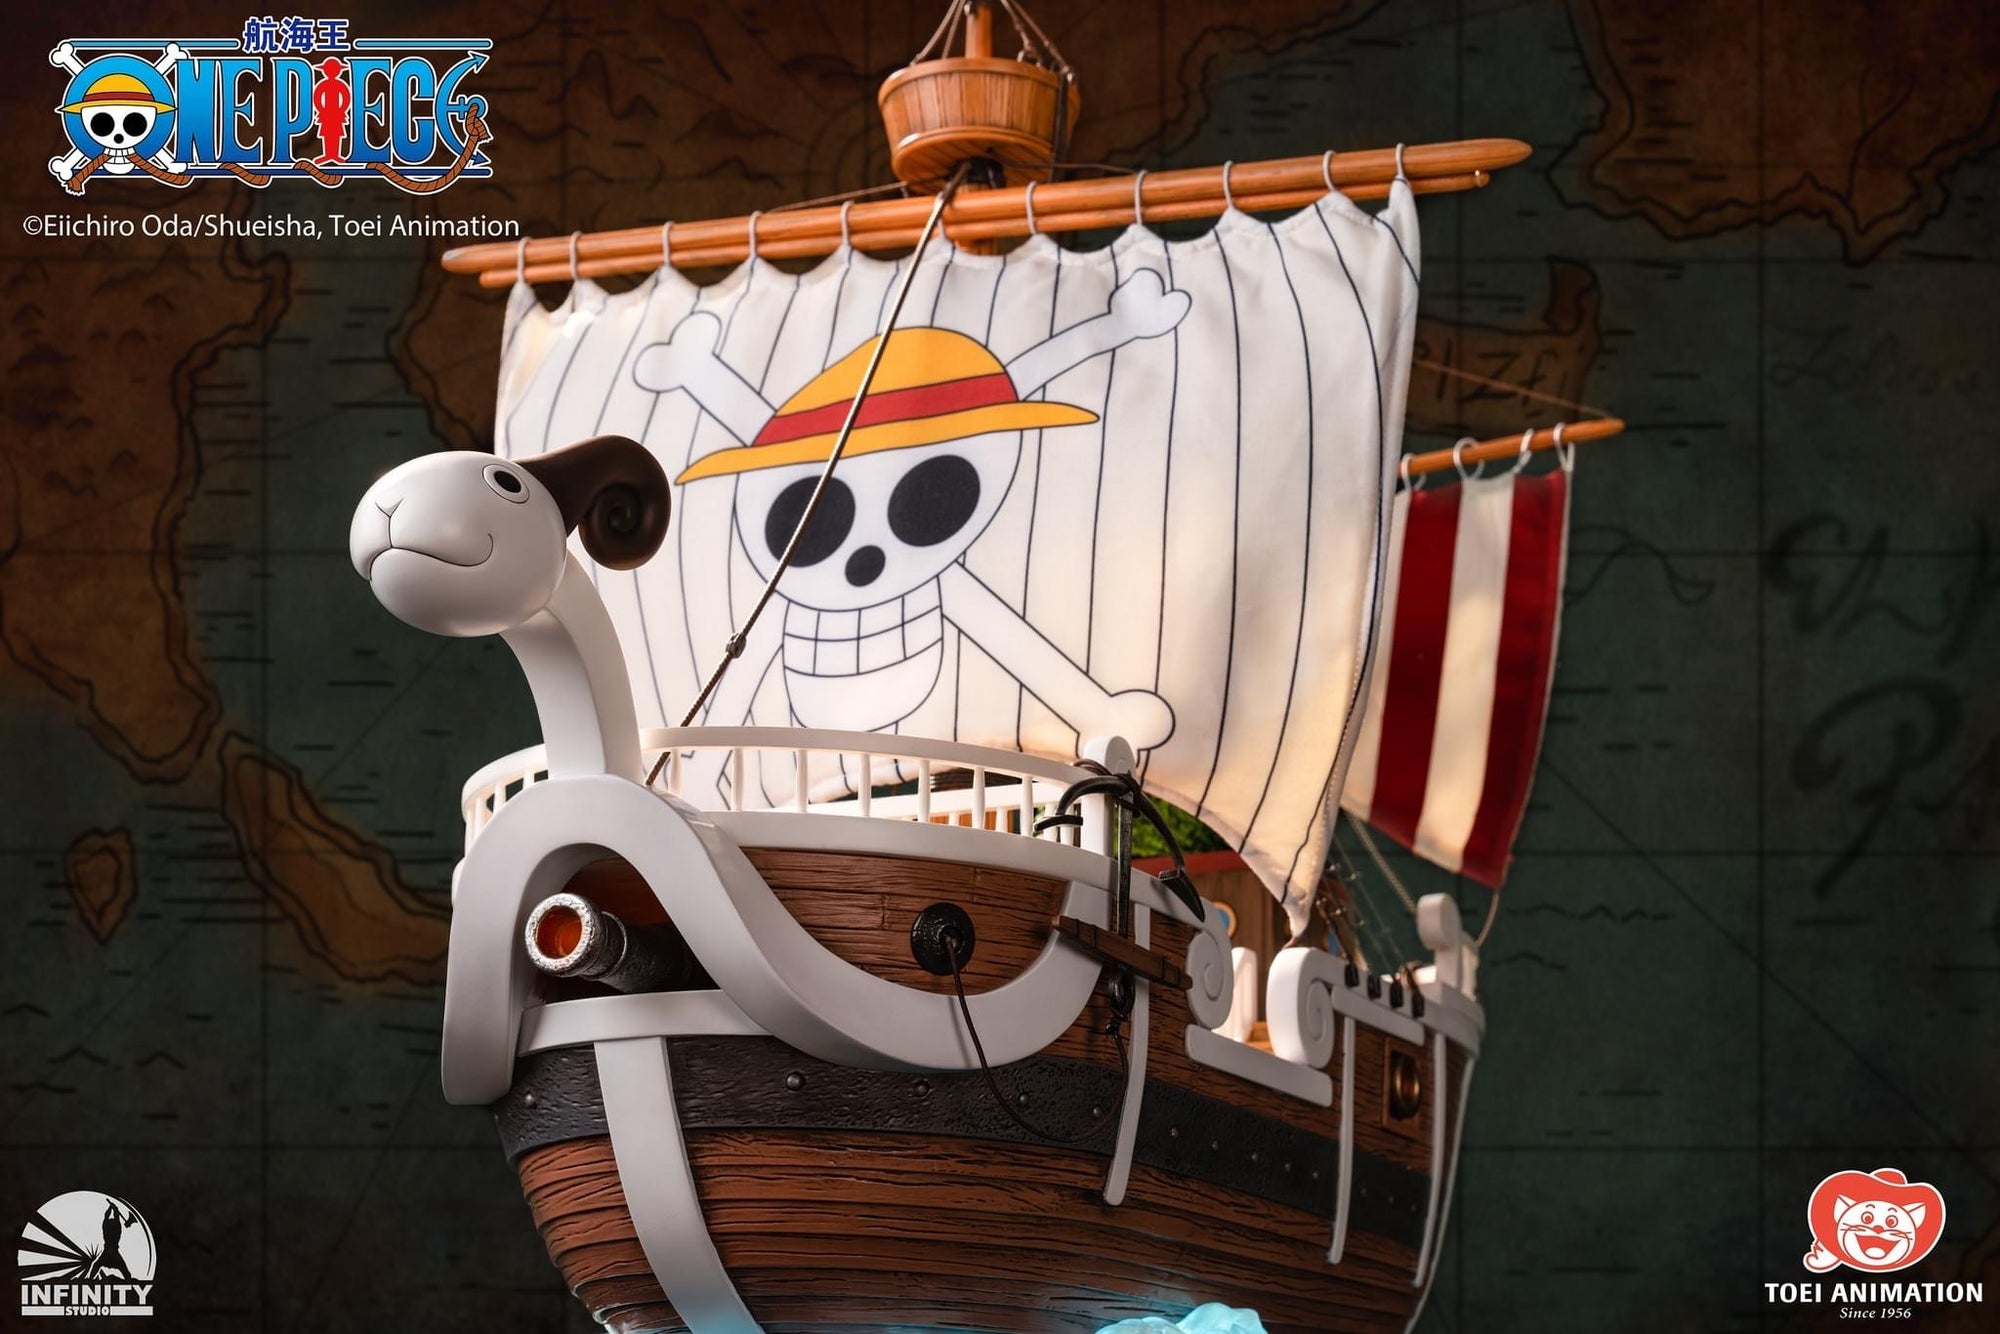 MM Studio One Piece Going Merry Statue w/ LED